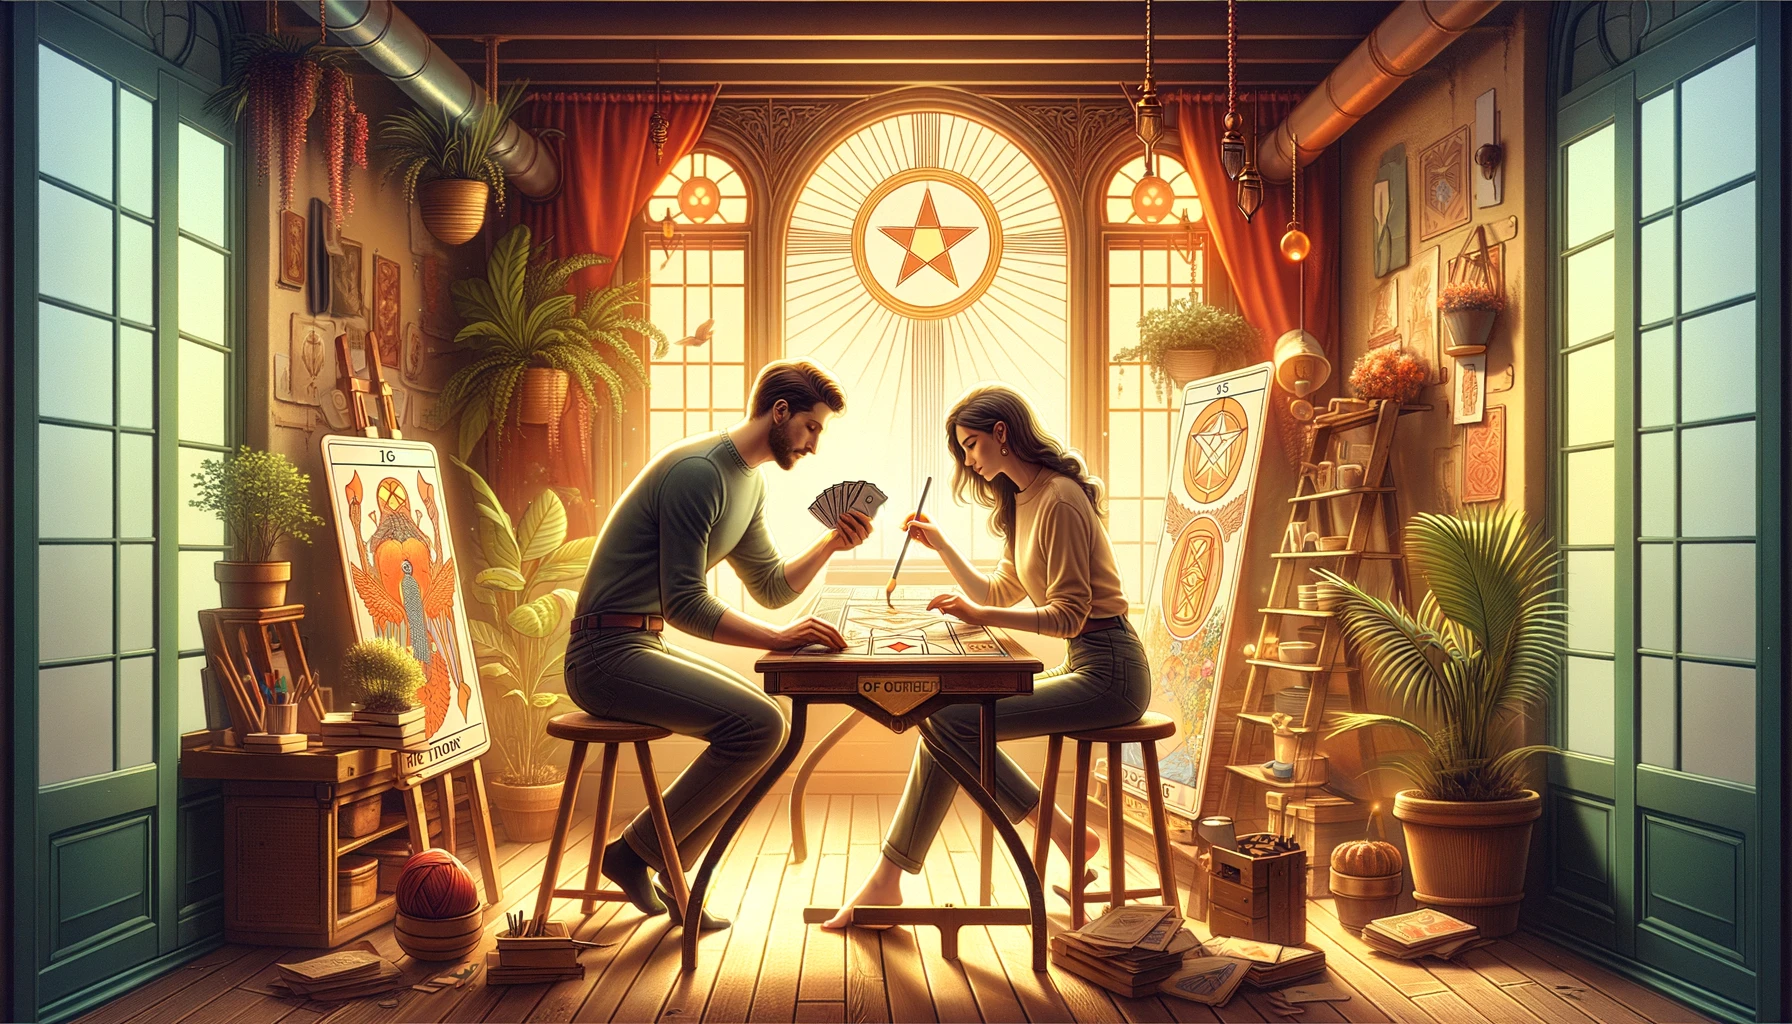 The image shows two individuals standing side by side, engaged in a collaborative task within a warm and inviting environment. They are both focused and determined, with expressions of concentration and unity. Each person contributes actively to the project, symbolizing commitment to growth and the value of hard work in nurturing their relationship. The setting is filled with positive energy, with vibrant colors and a sense of harmony, reflecting the joy of achieving goals together. This visualization embodies themes of teamwork, perseverance, and the satisfaction derived from a partnership where both individuals are invested in their collective journey and the continuous improvement of their bond.